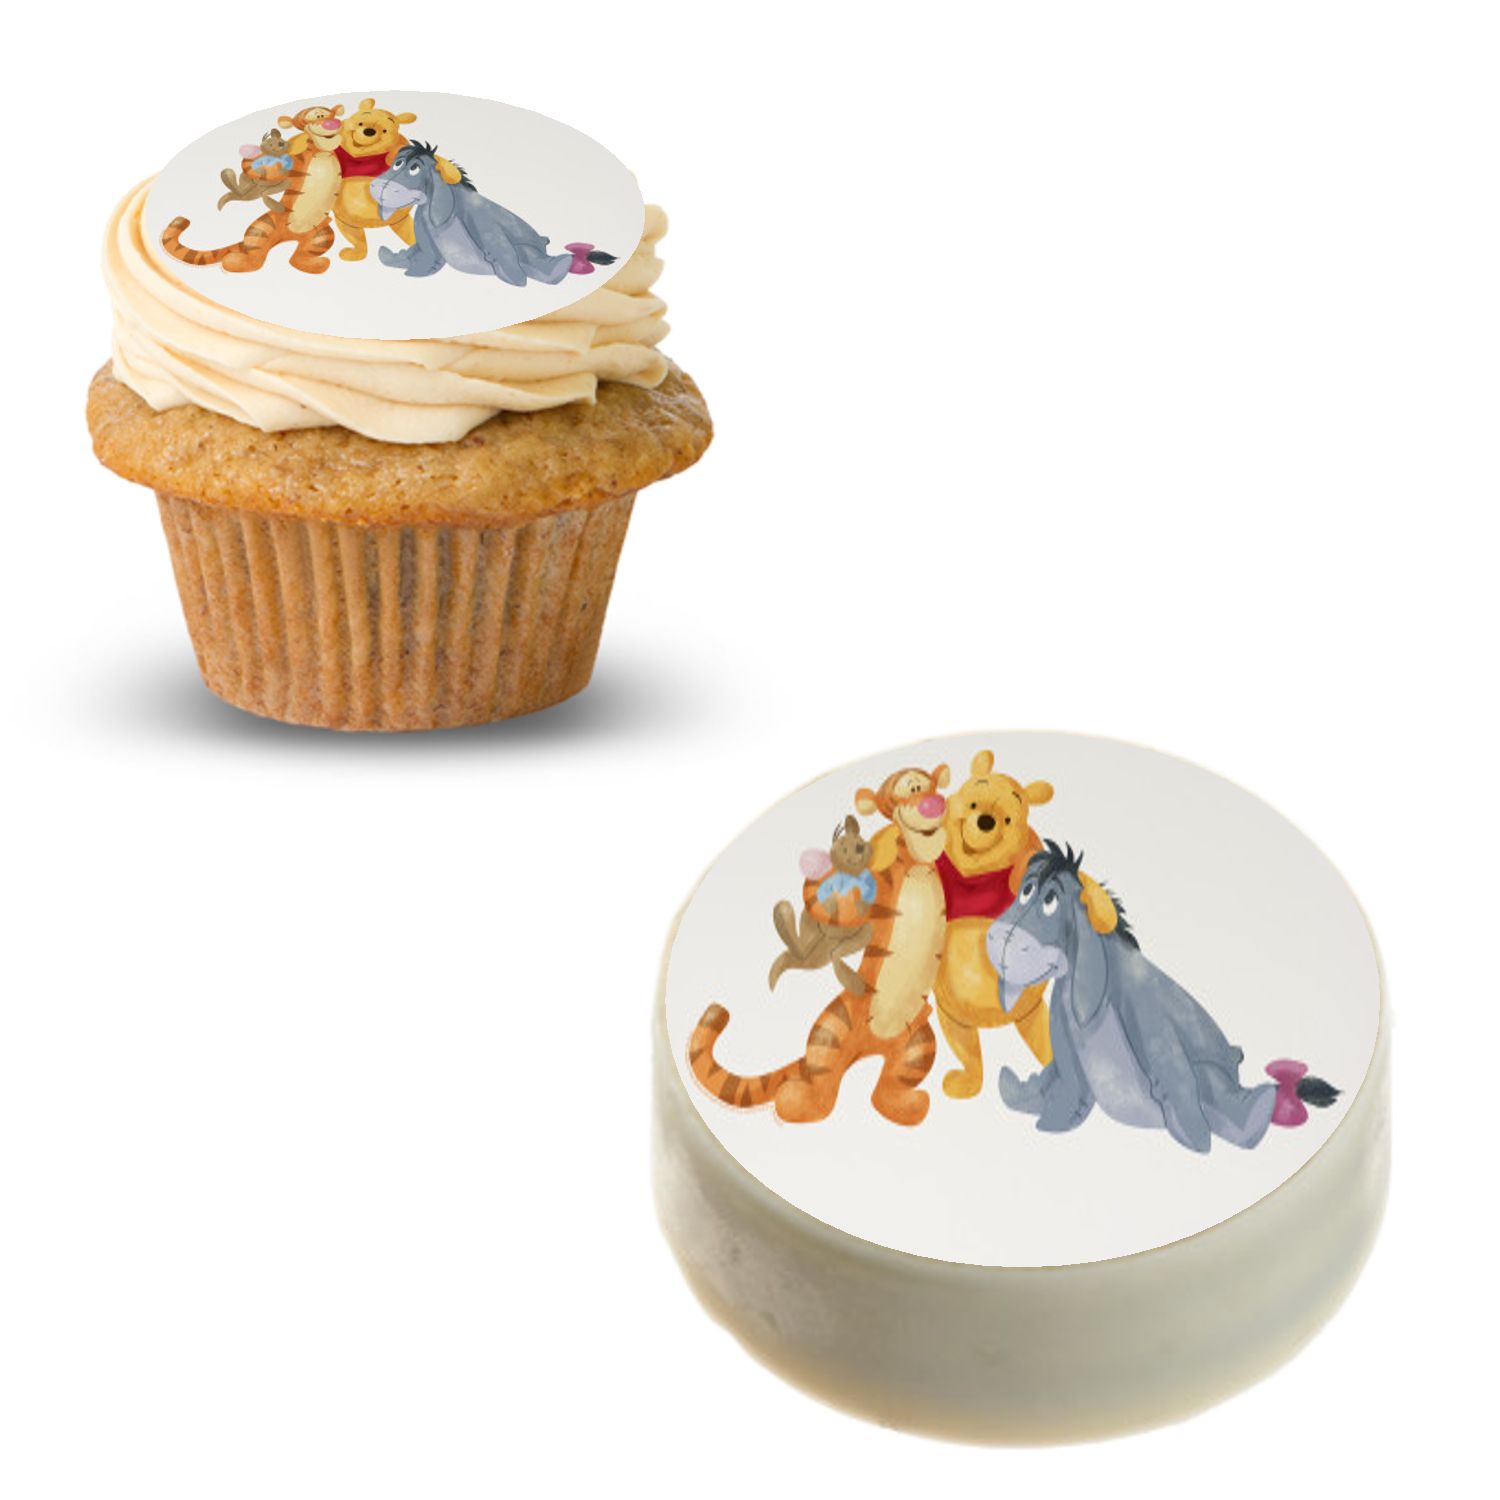 Winnie the Pooh Edible Cupcake Topper Images ABPID05859 – A